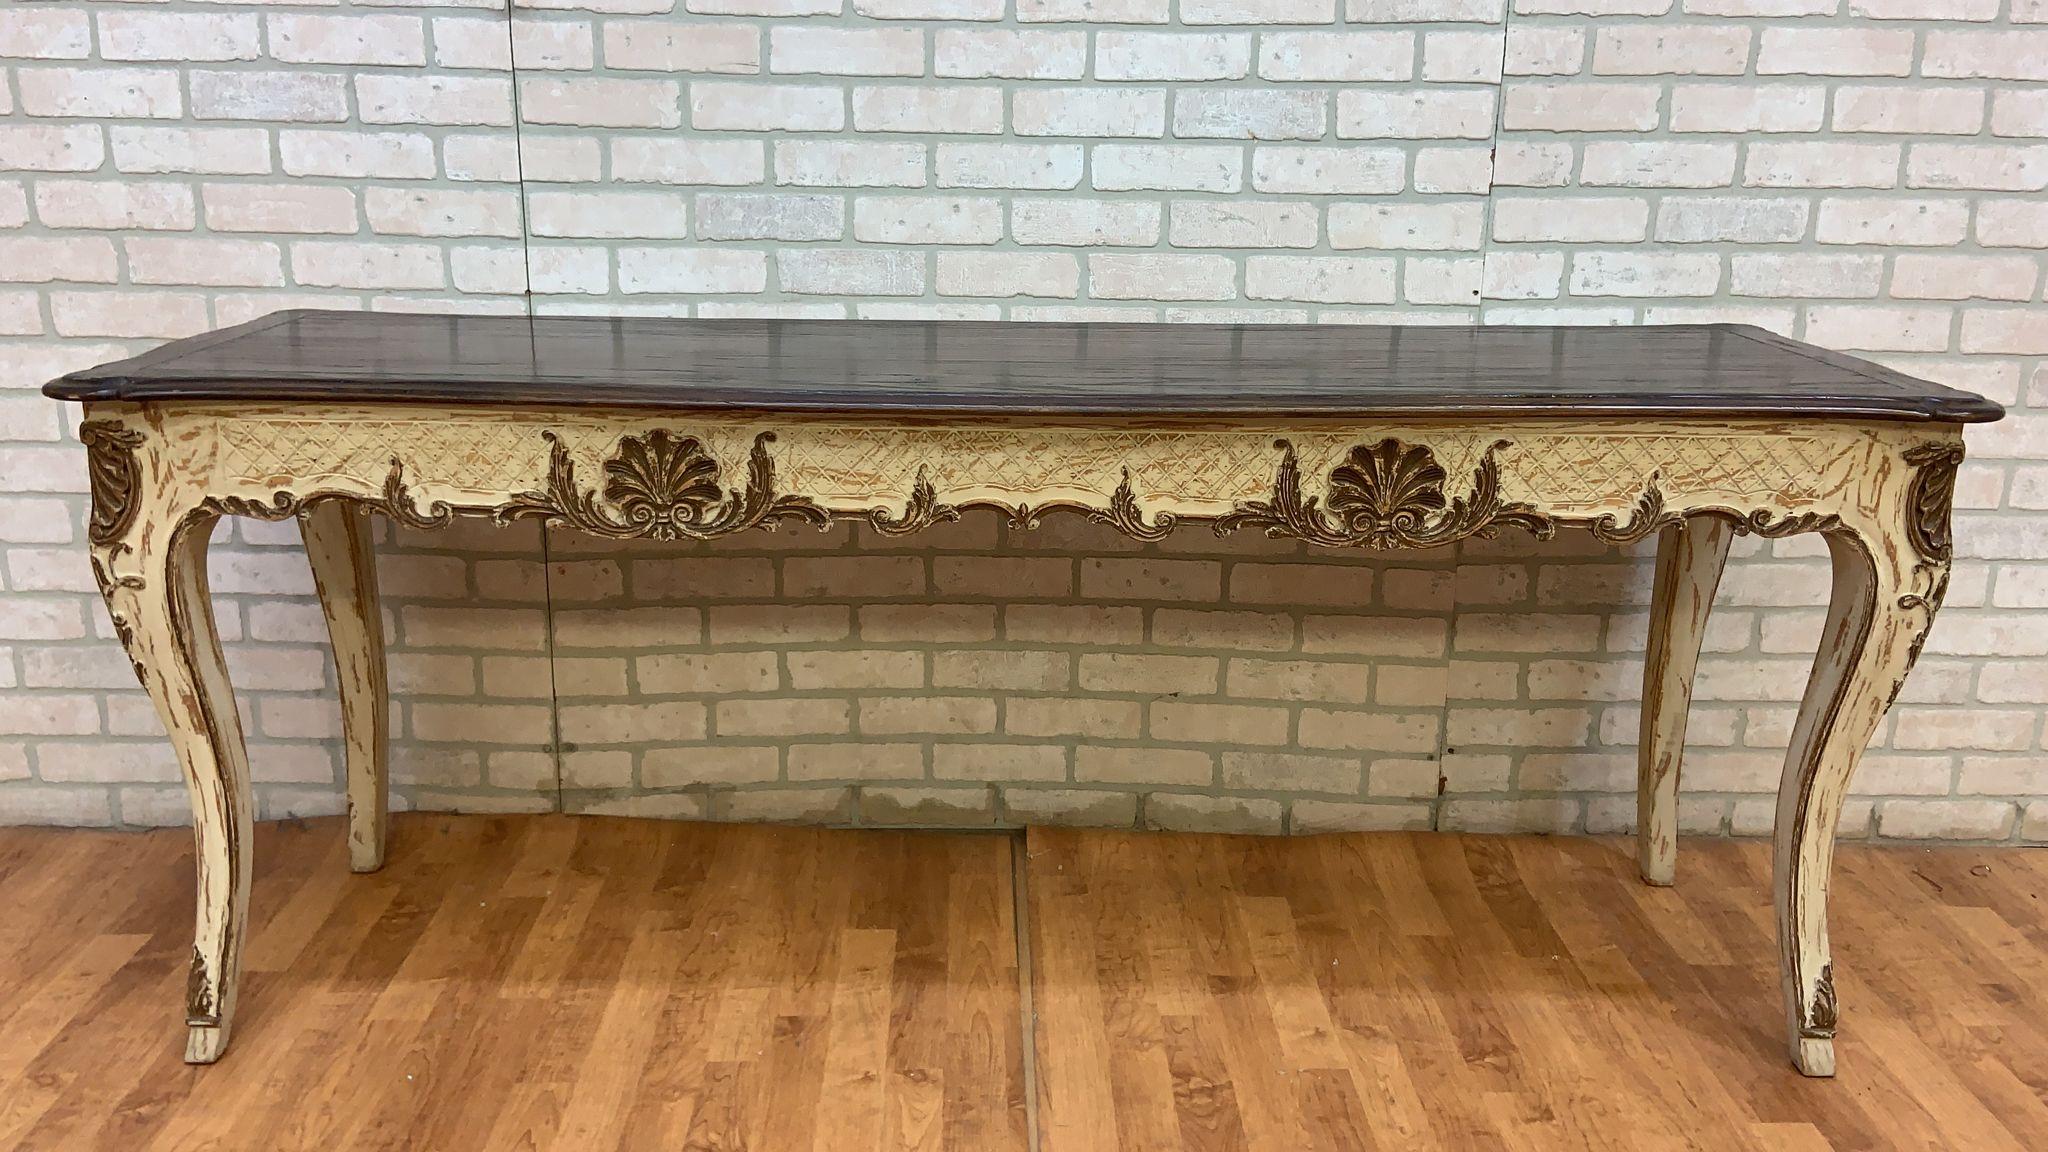 Vintage French Provincial Hand Carved Console Table with Cherry Wood Top

This exquisite French country inspired console table showcases hand-carved details and a beautifully distressed painted patina finish. Its cherry wood top adds a touch of